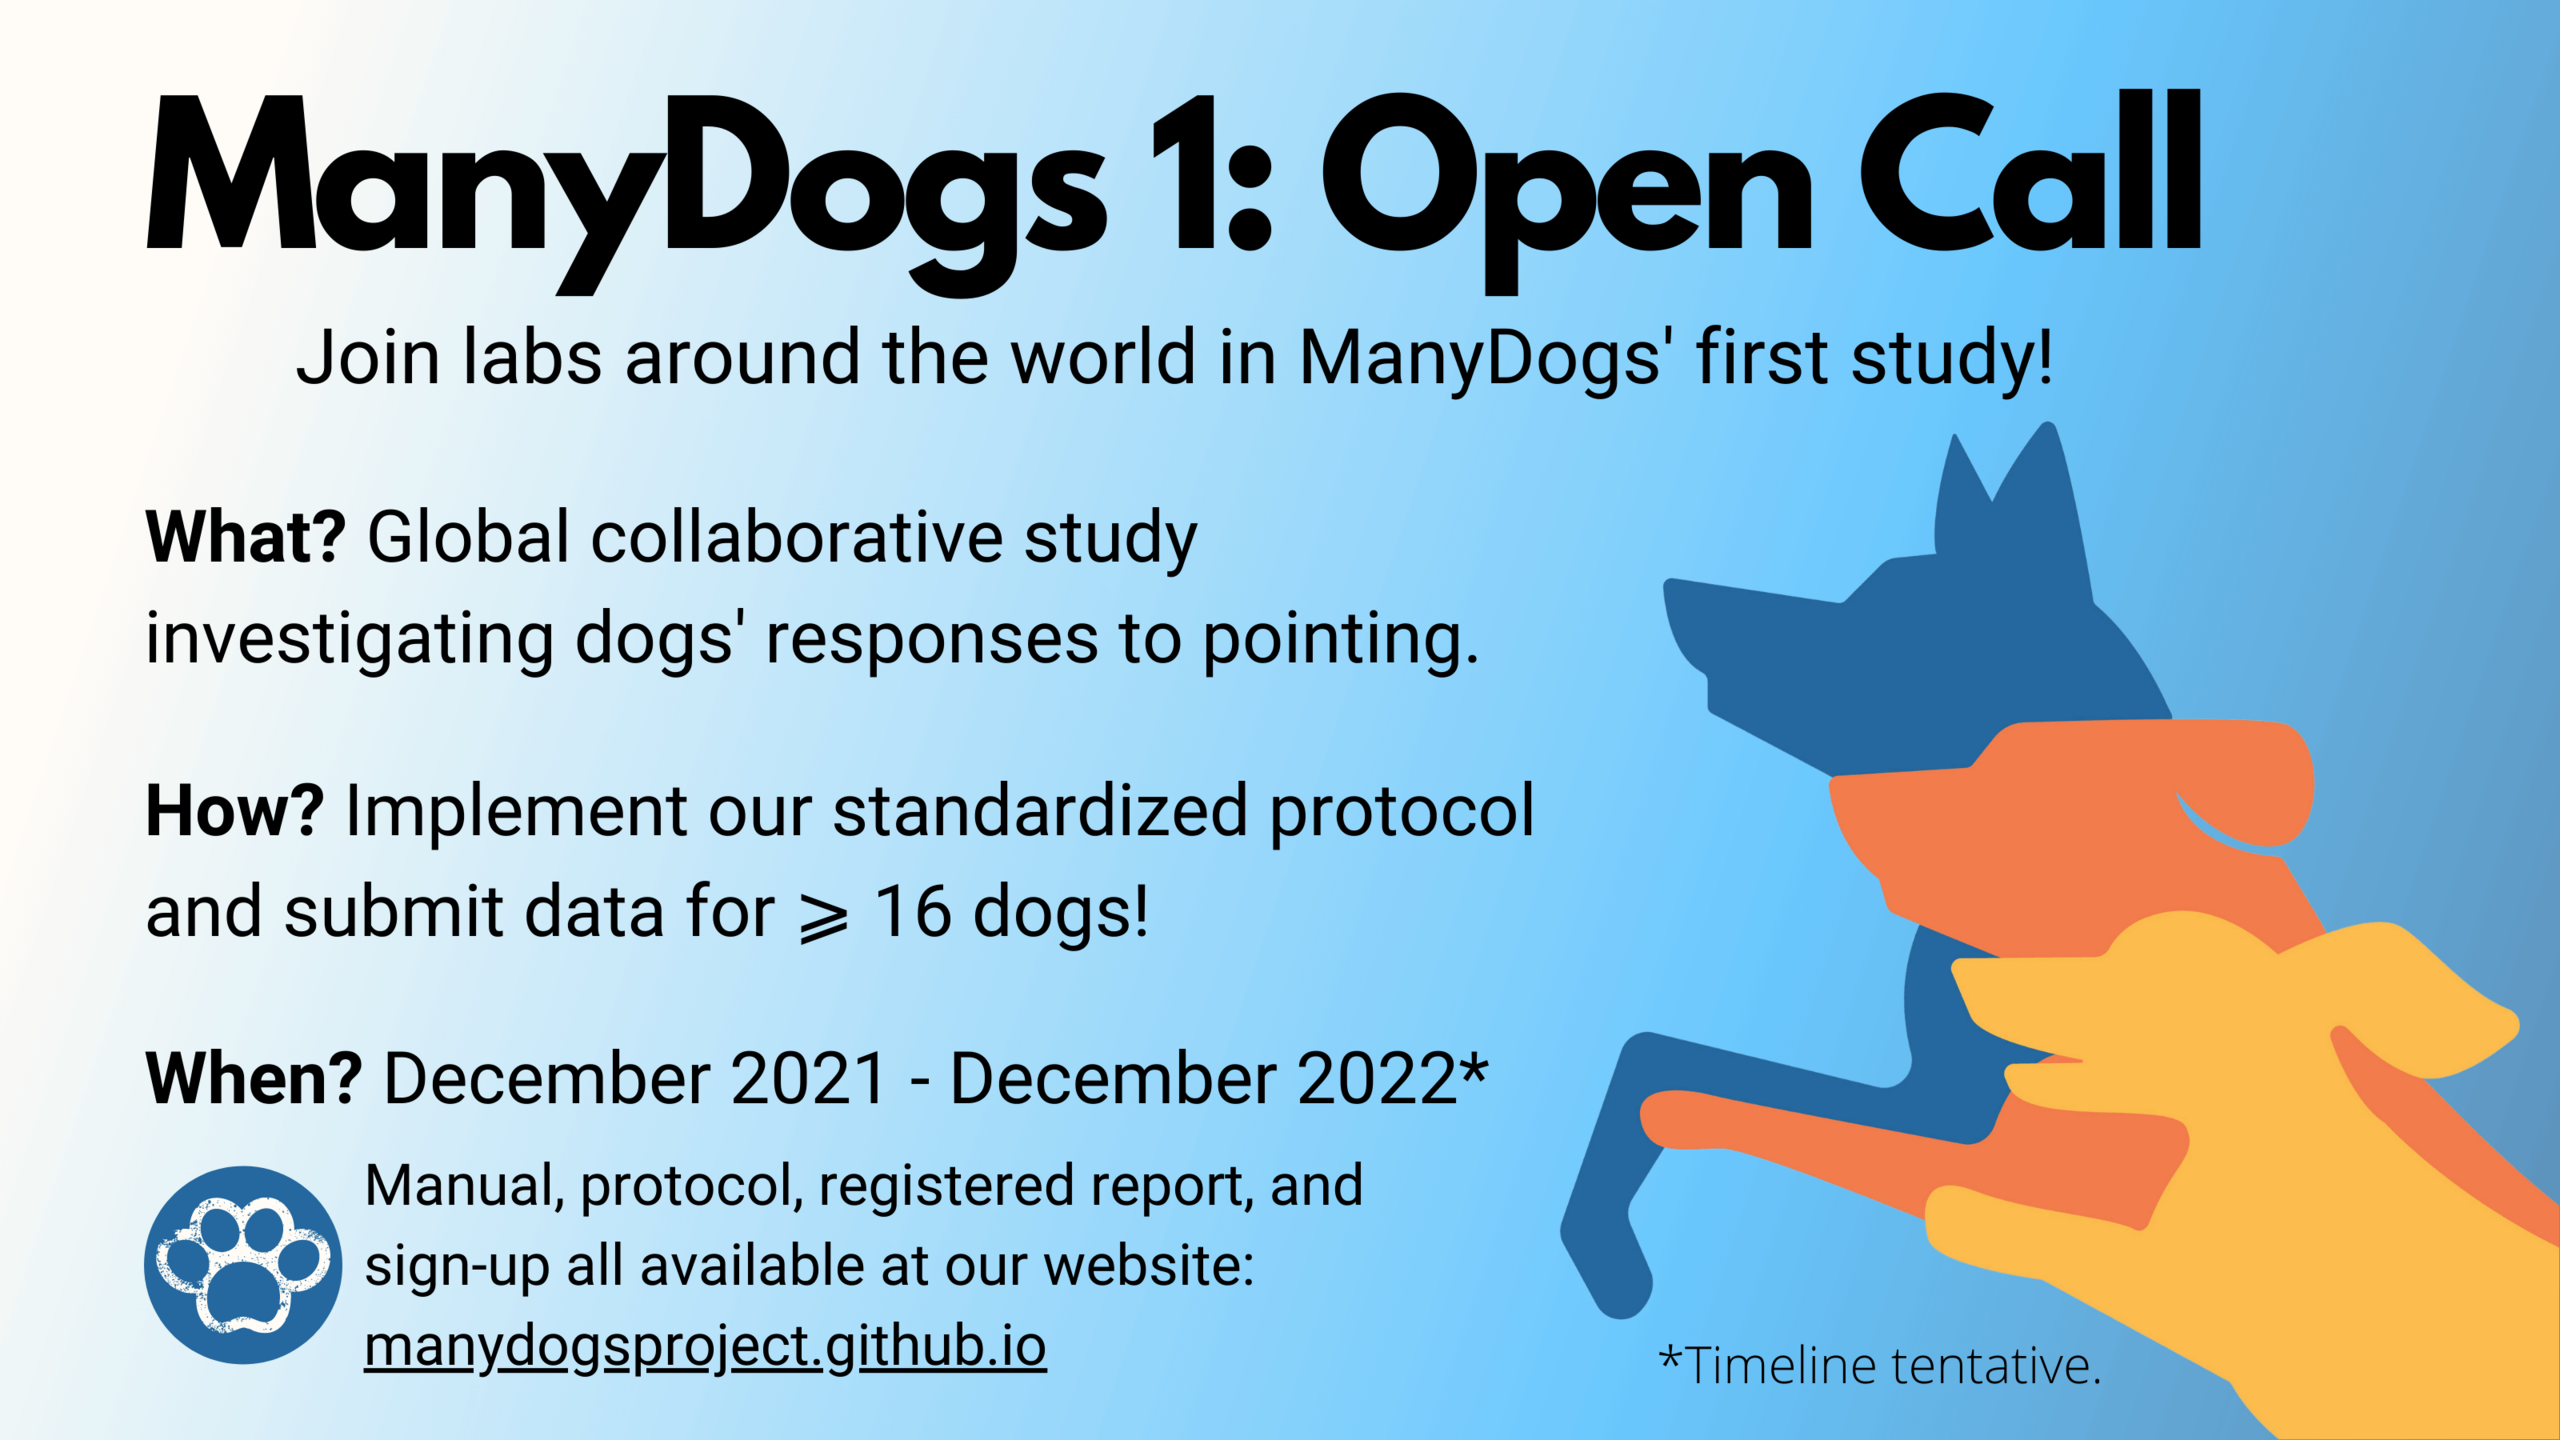 Many Dogs advertises participation for research groups